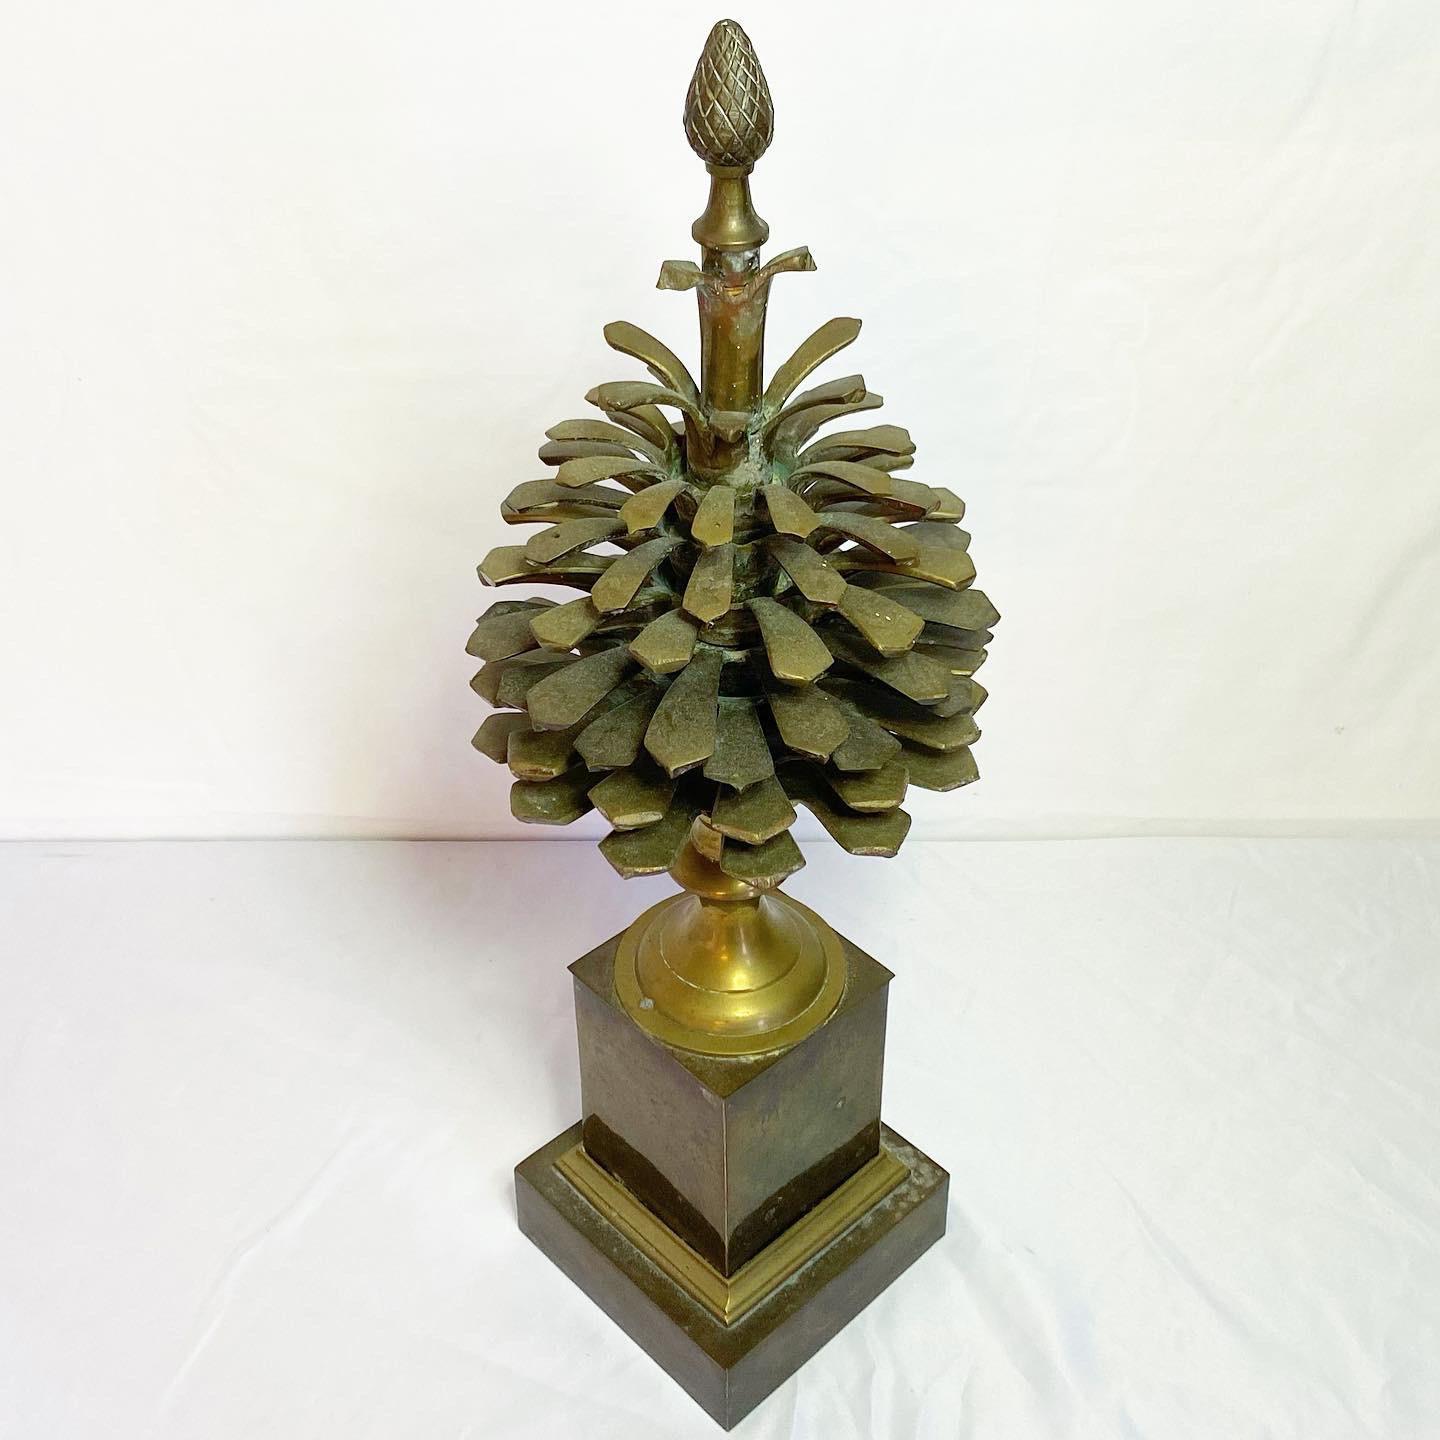 Mid Century Brass Pinecone Sculpture by Mottahedeh Design speaks wonders. 
Incredible sculpture of an acorn on a marble base.